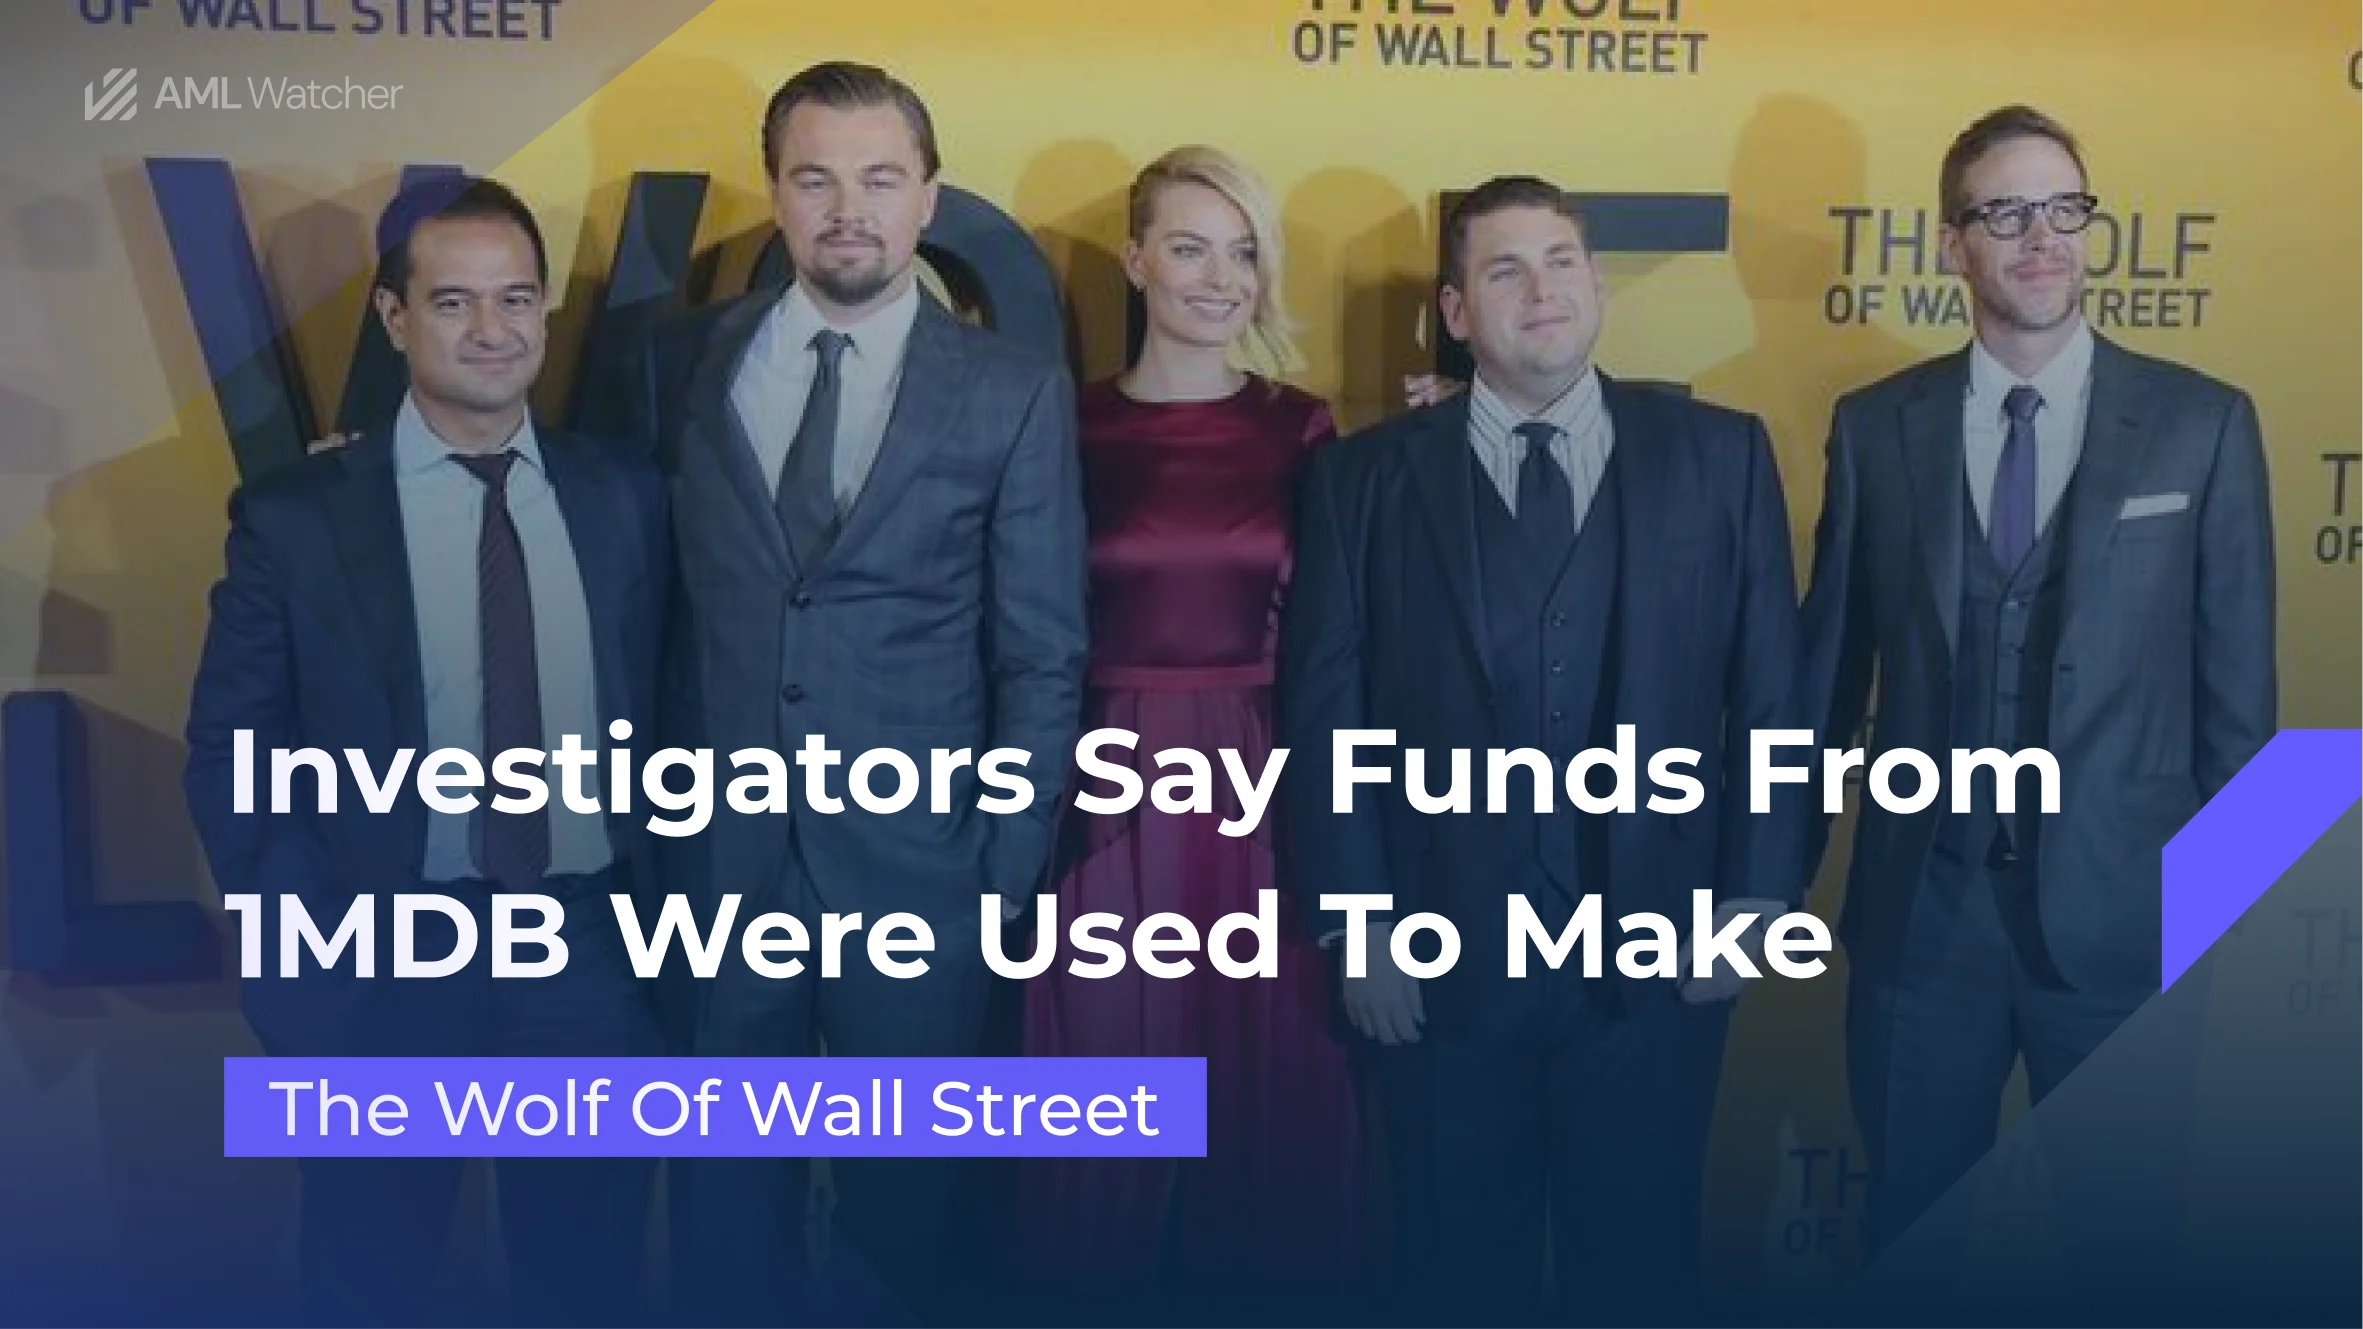 Producers of the Wolf Of Wall Street also got embroiled in 1MDB Sandal.